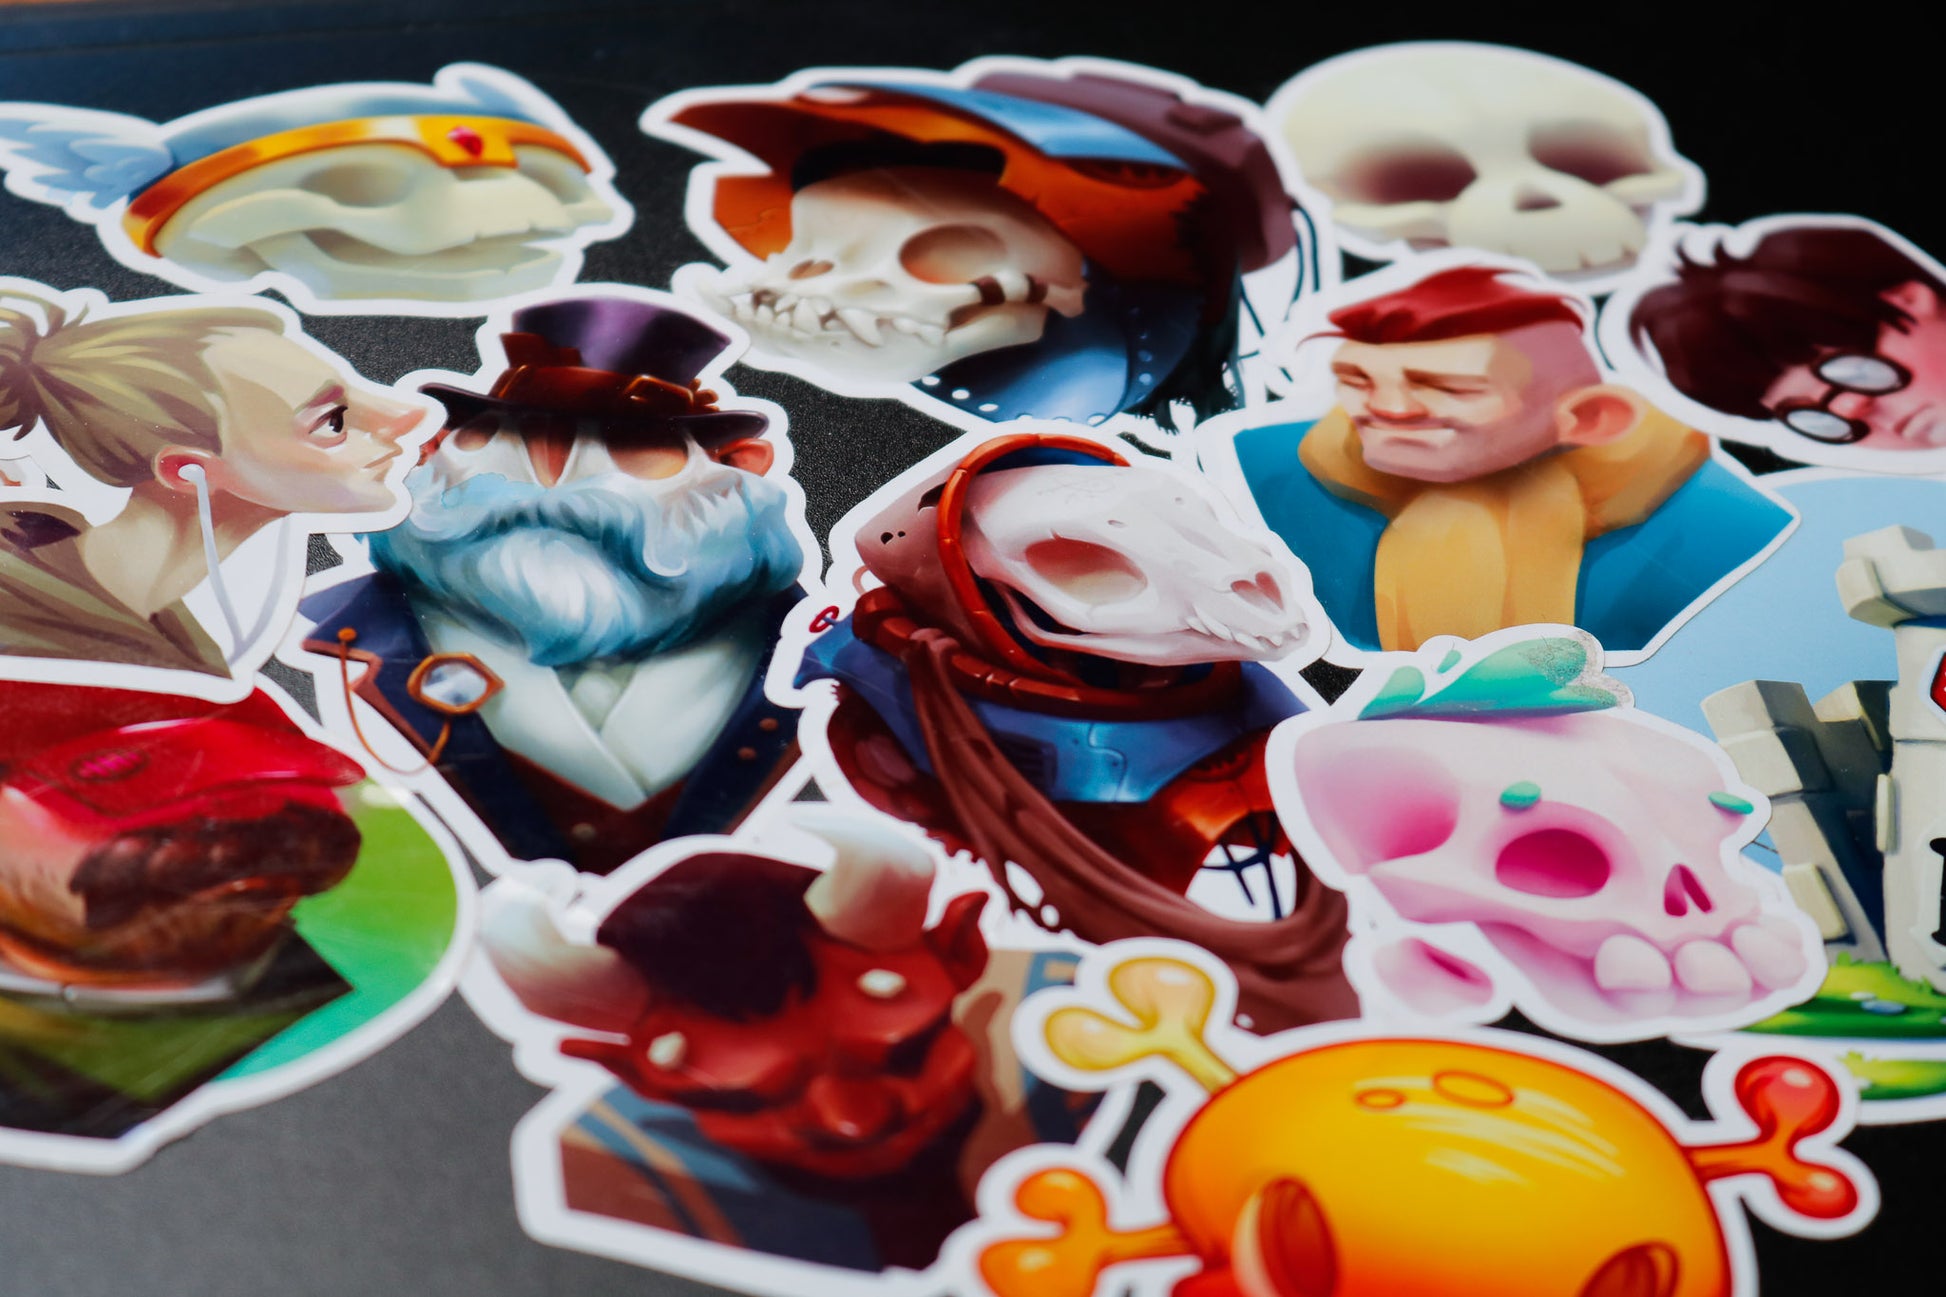 Several colorful stickers with skulls and characters featured overlapping on a black surface.